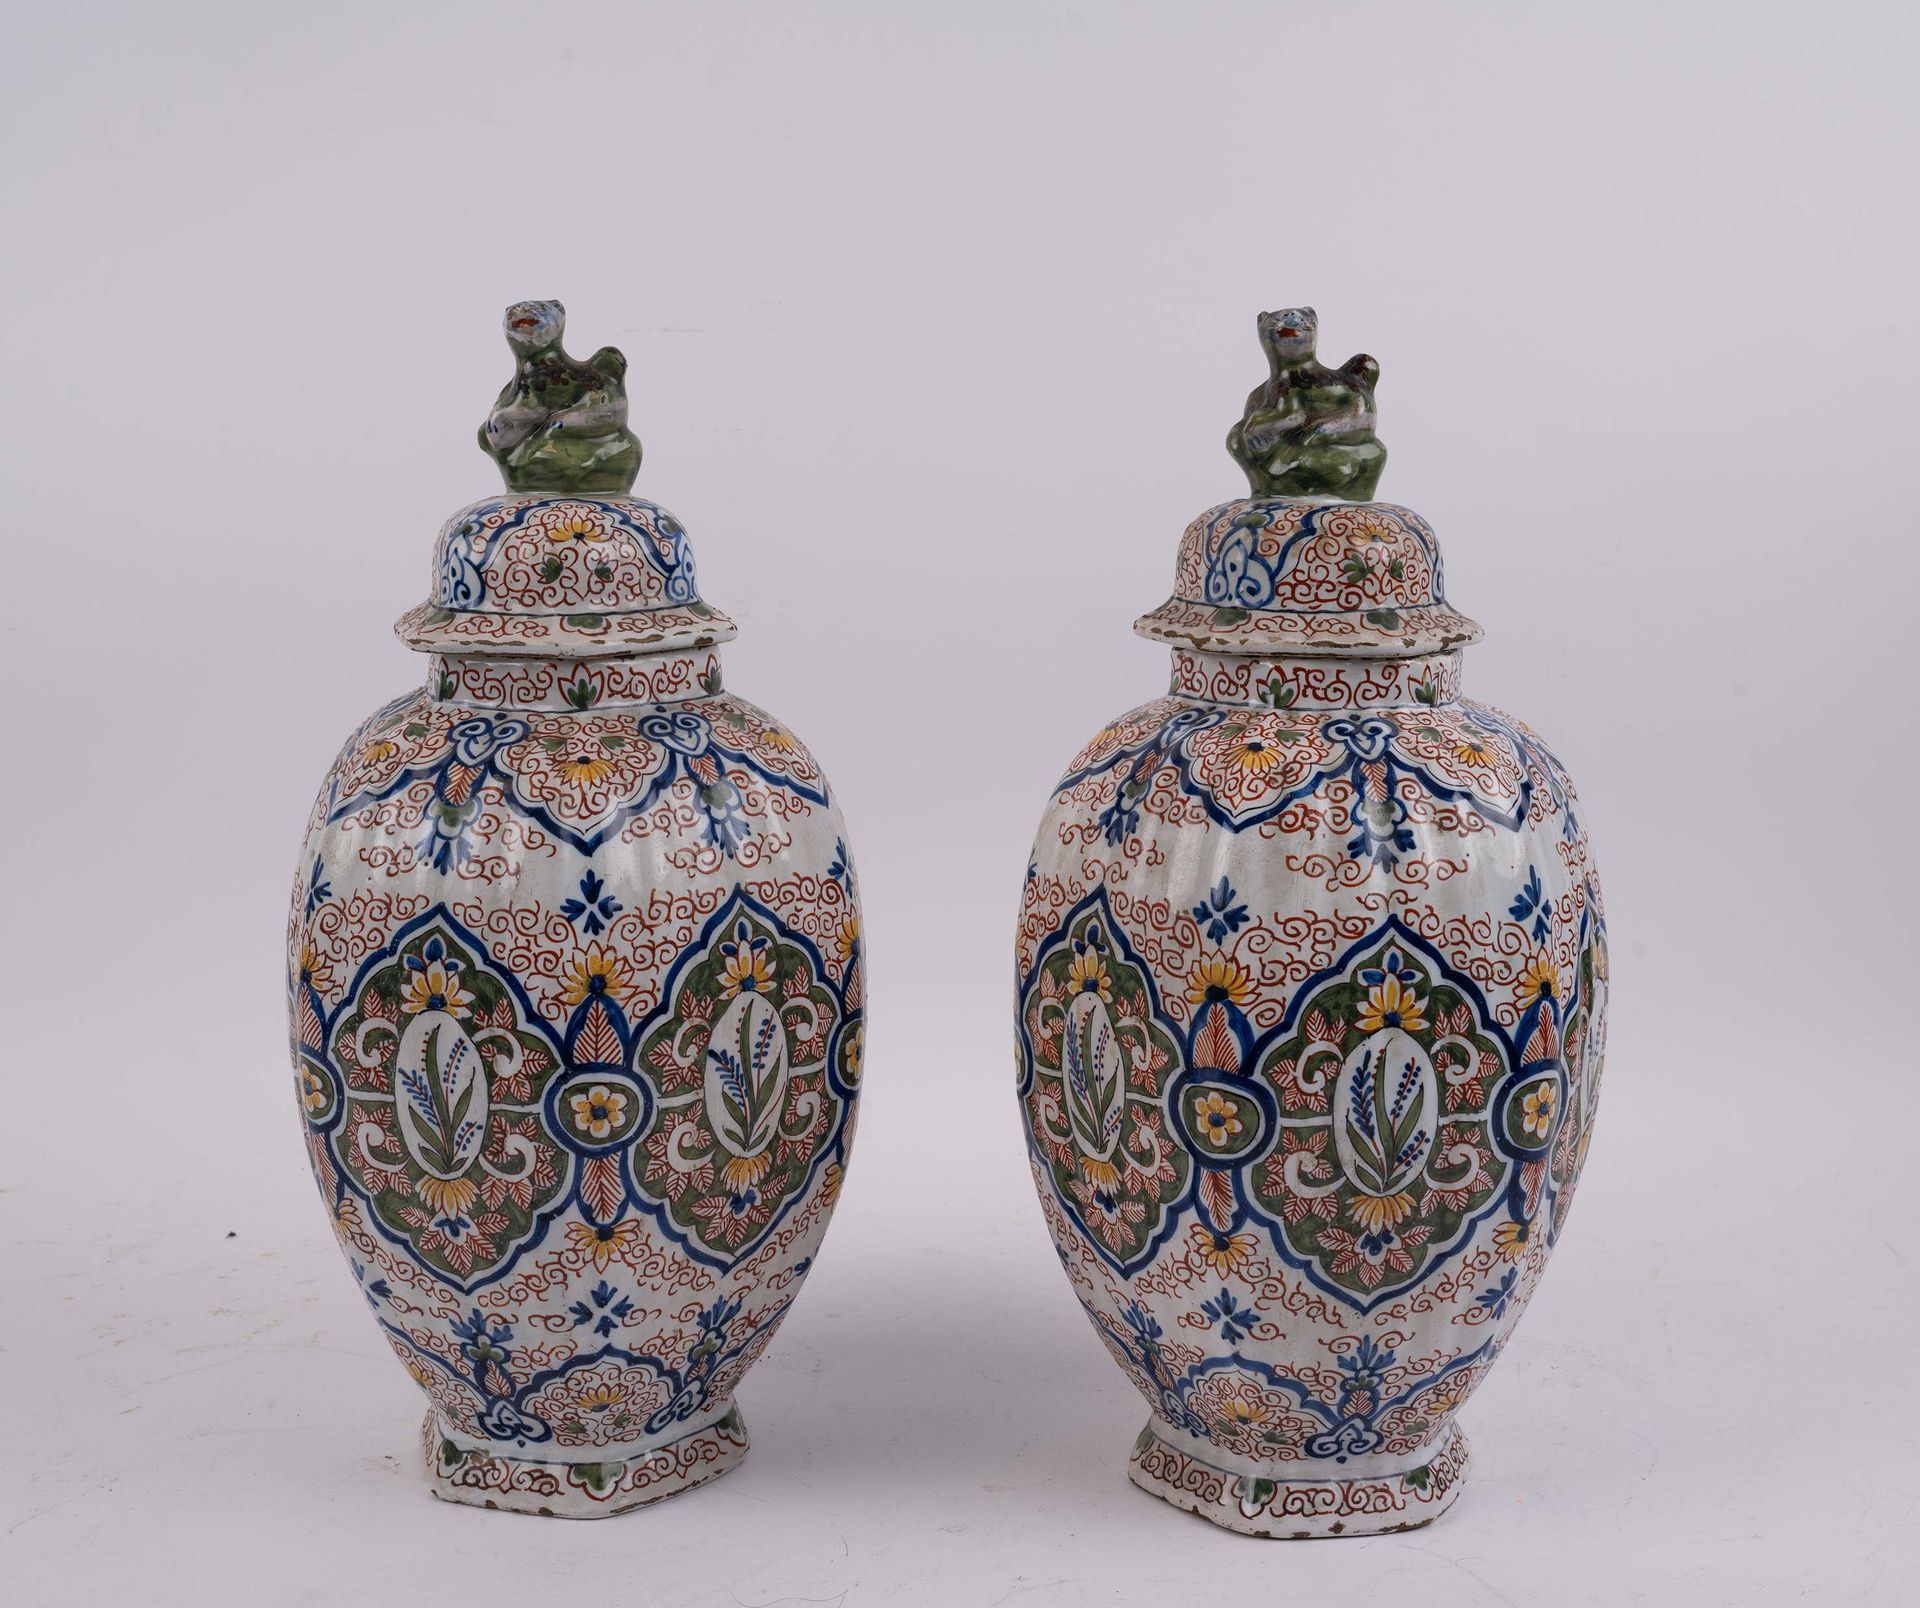 Null DELFT 18th century, Pair of covered earthenware vases with grand feu polych&hellip;